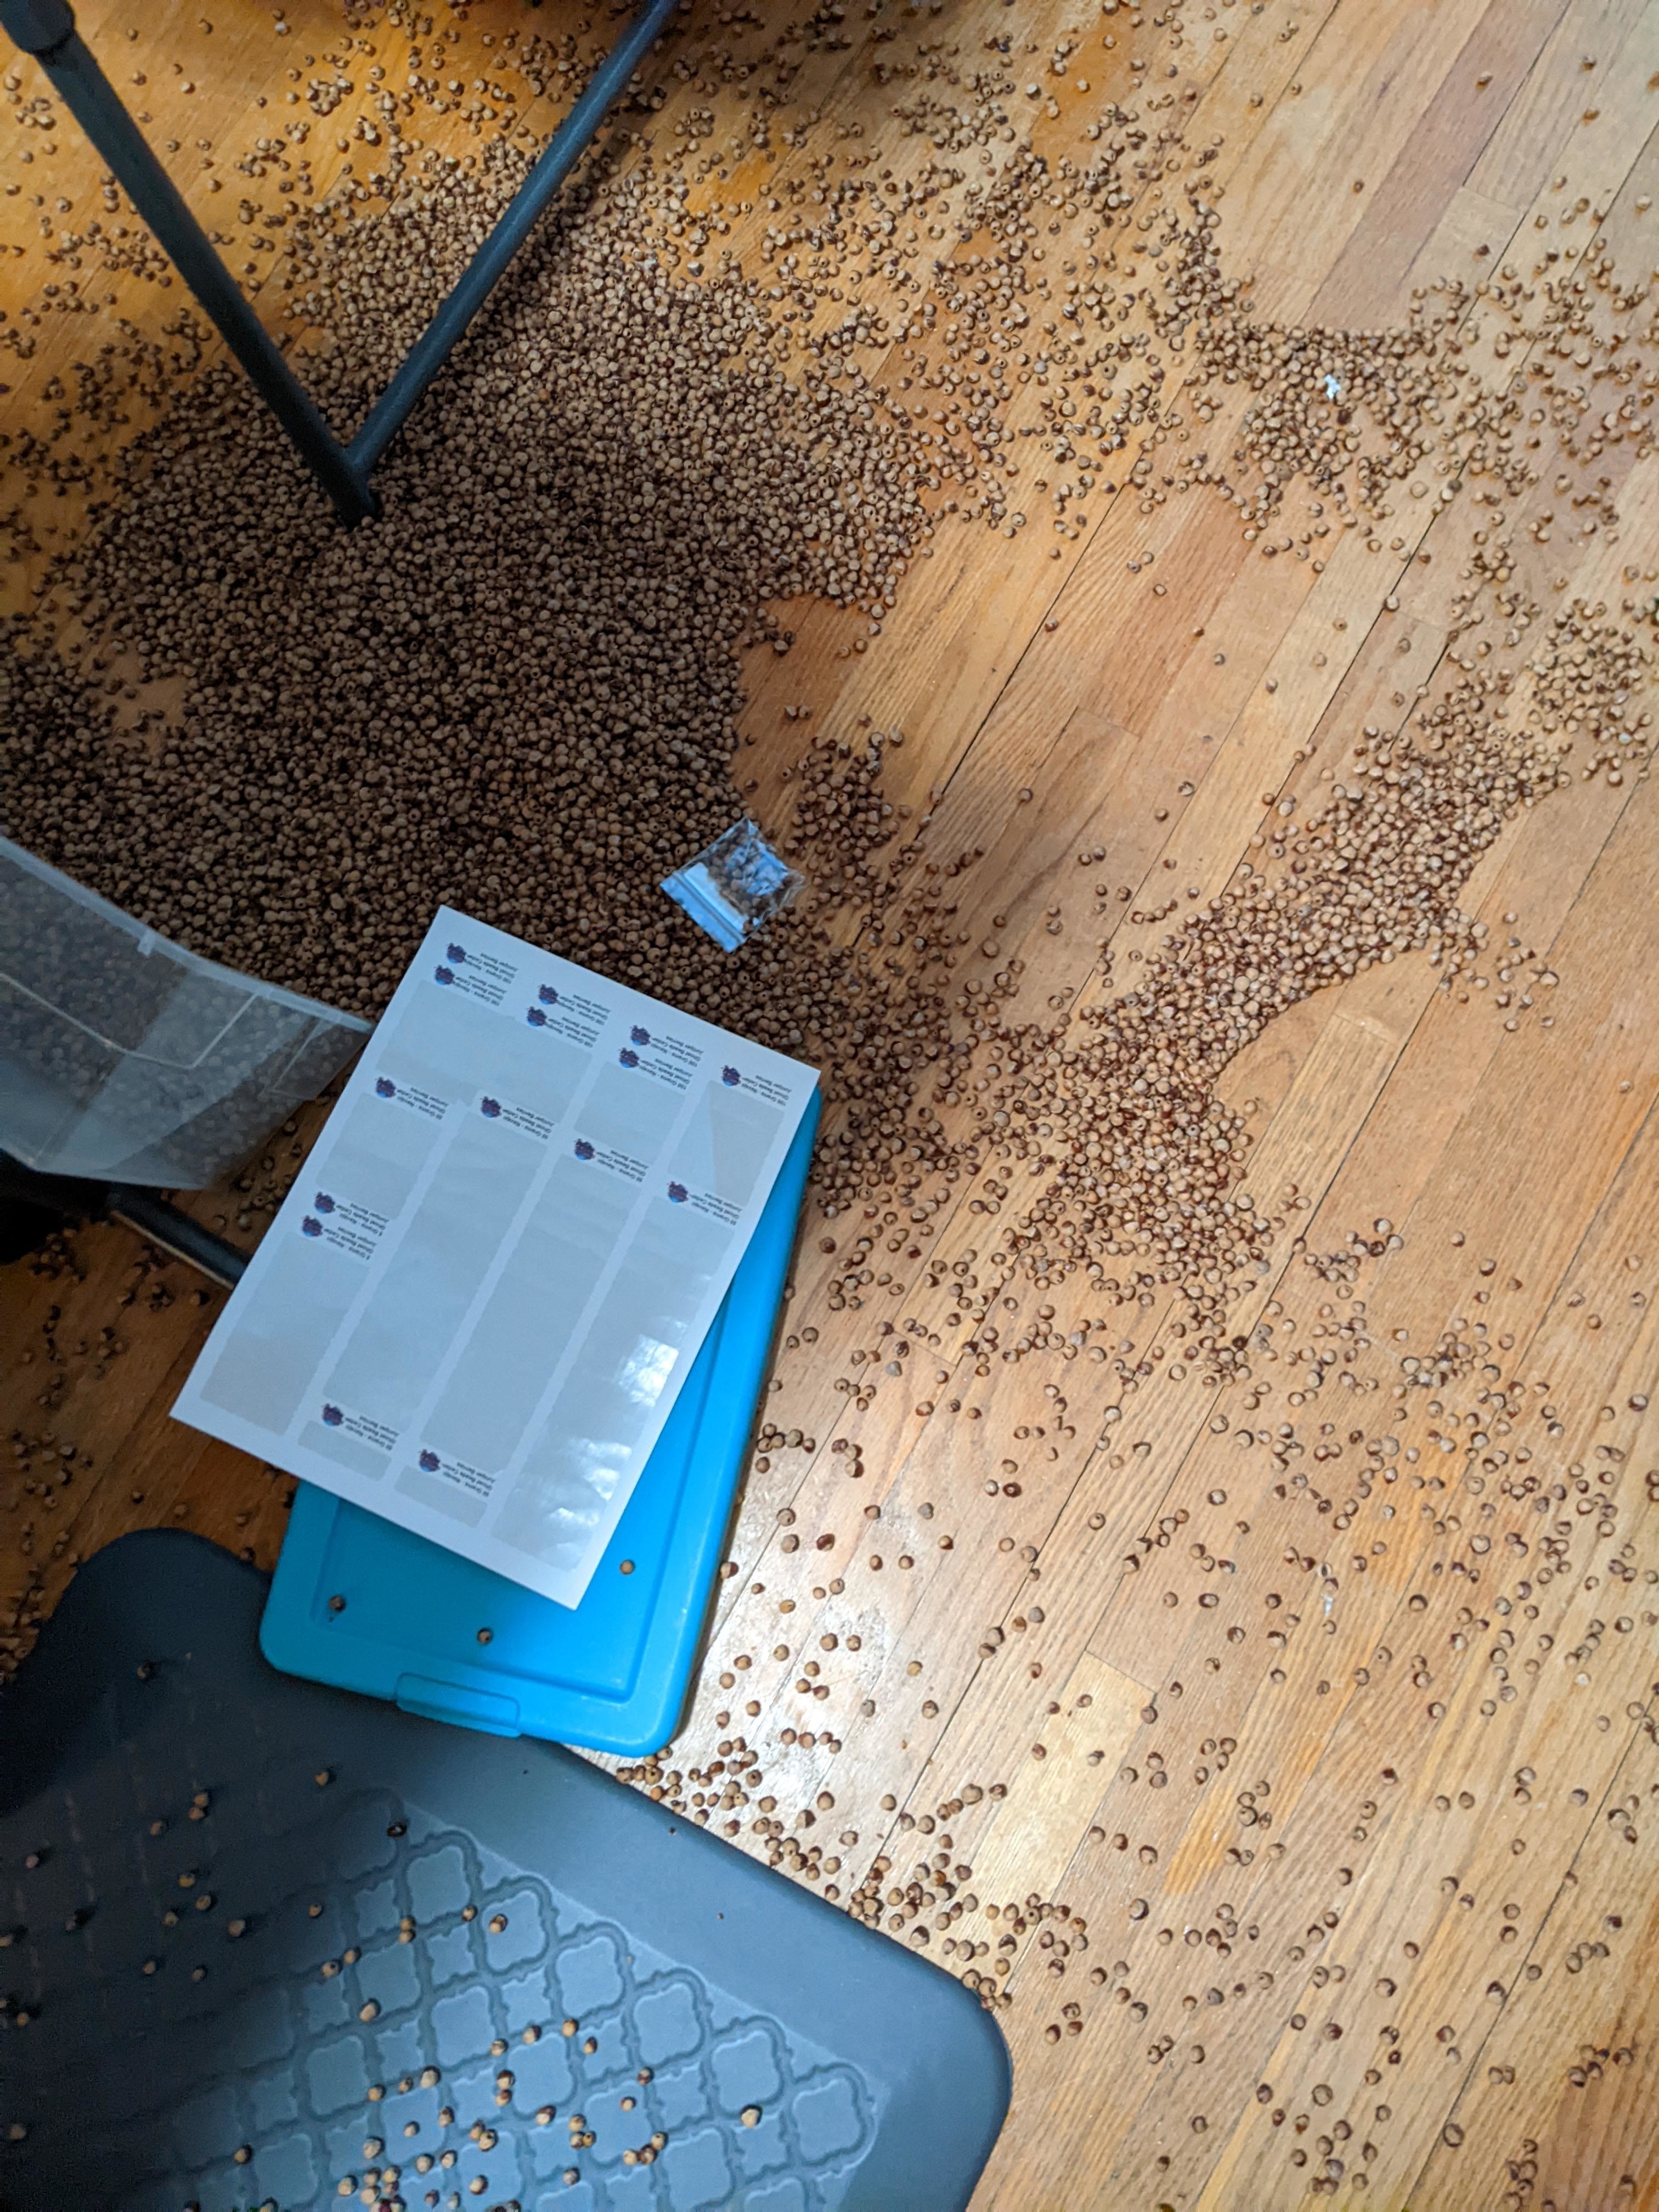 Overturned chair and a clipboard next to a large spill of small round objects on a wooden floor